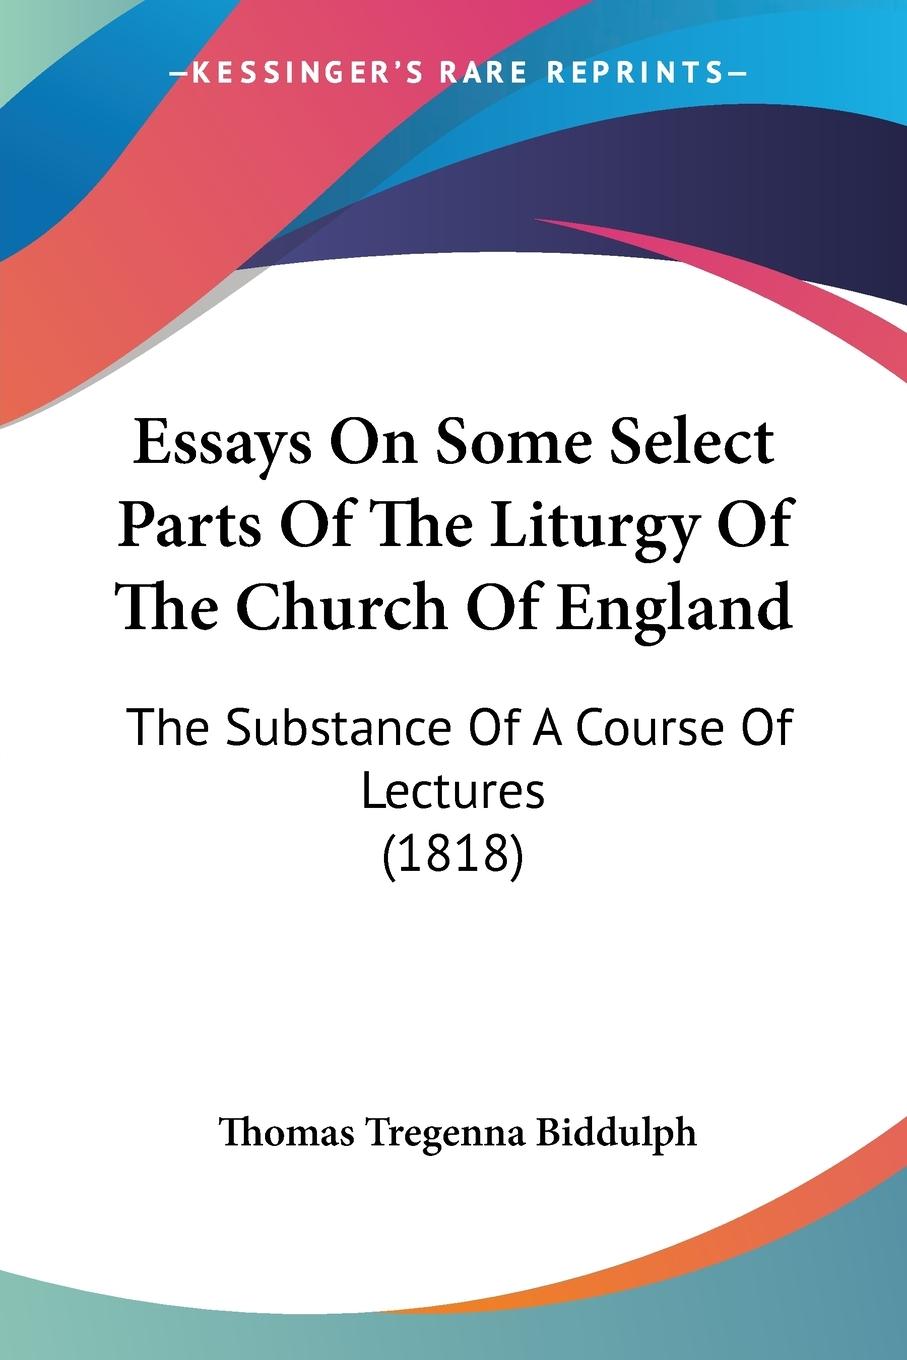 Essays On Some Select Parts Of The Liturgy Of The Church Of England - Biddulph, Thomas Tregenna